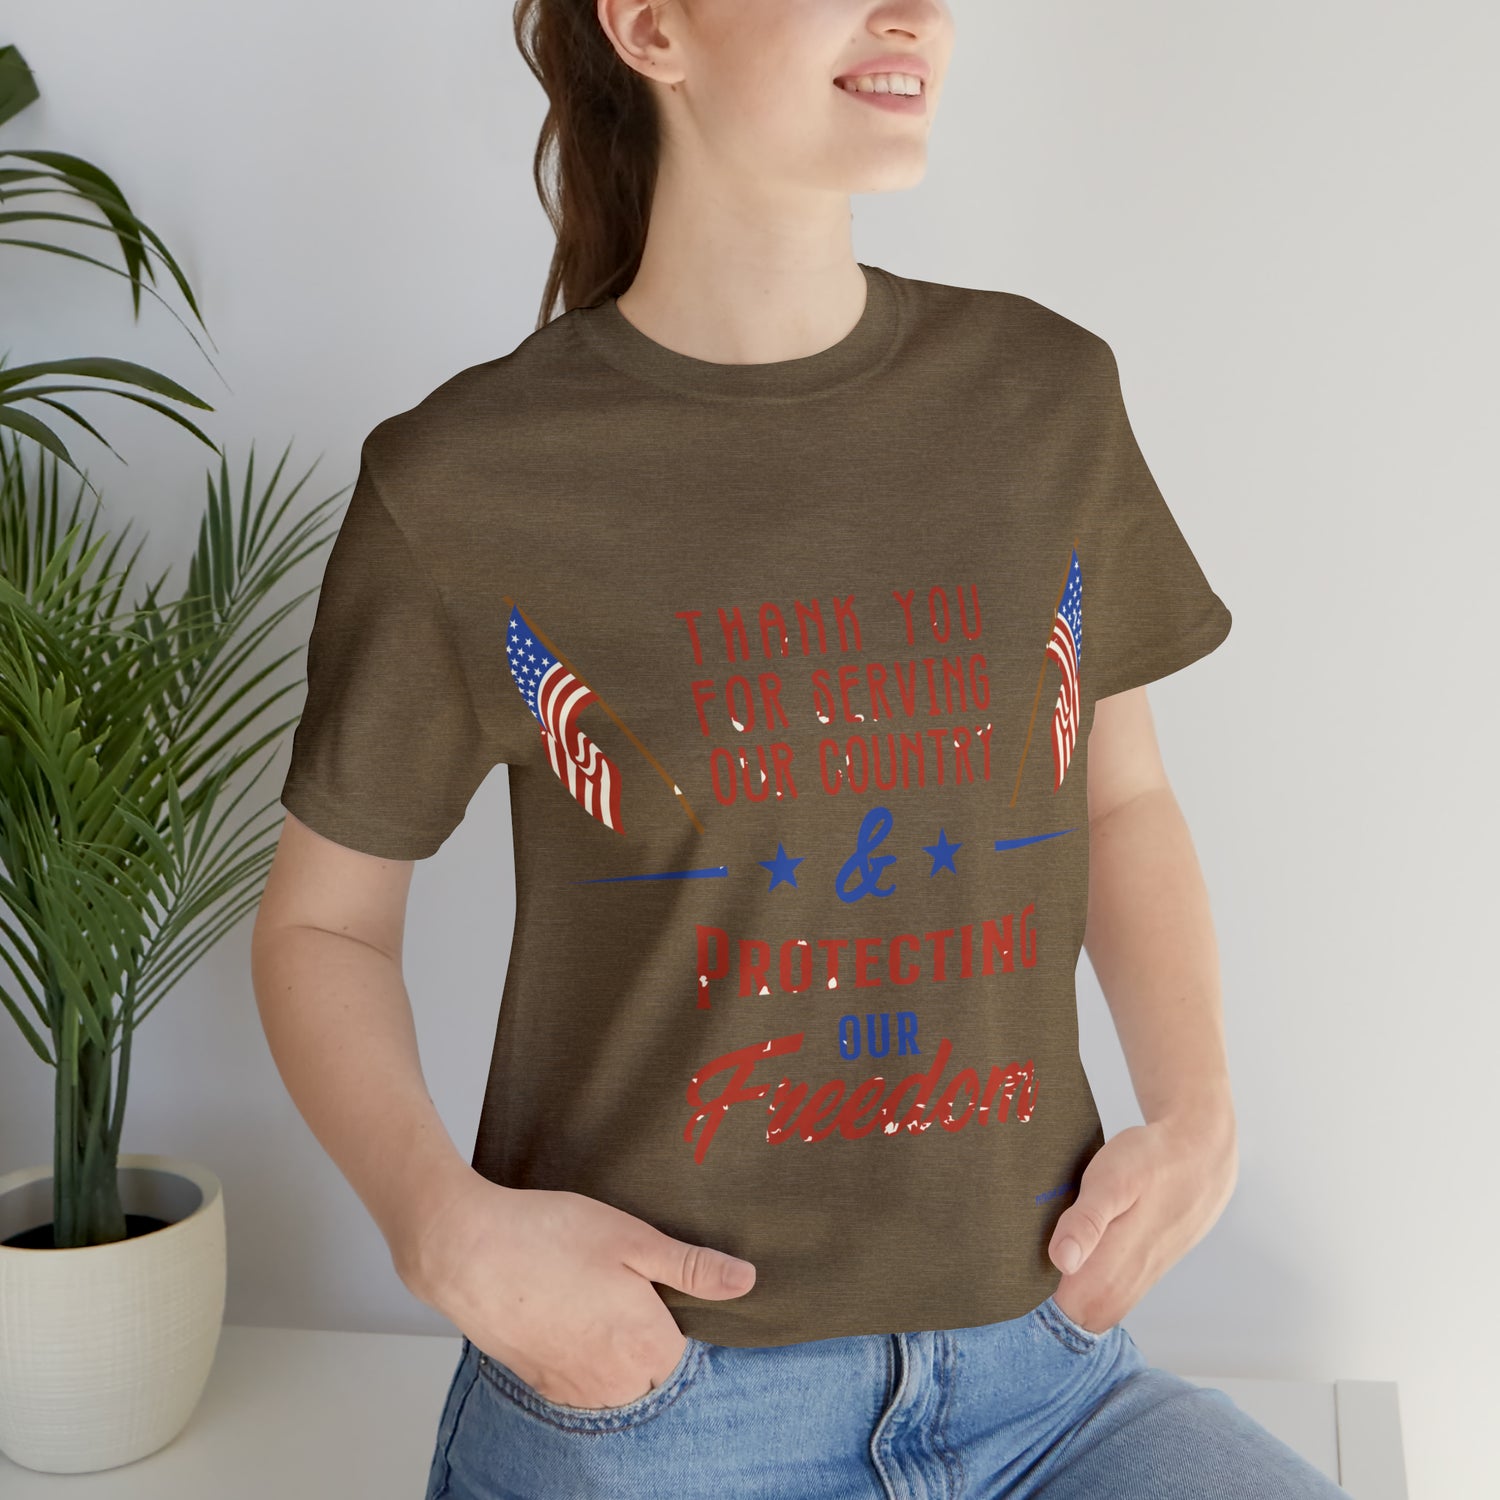 Heather Olive T-Shirt Tshirt Design Gift for Friend and Family Short Sleeved Shirt Veterans Day Petrova Designs